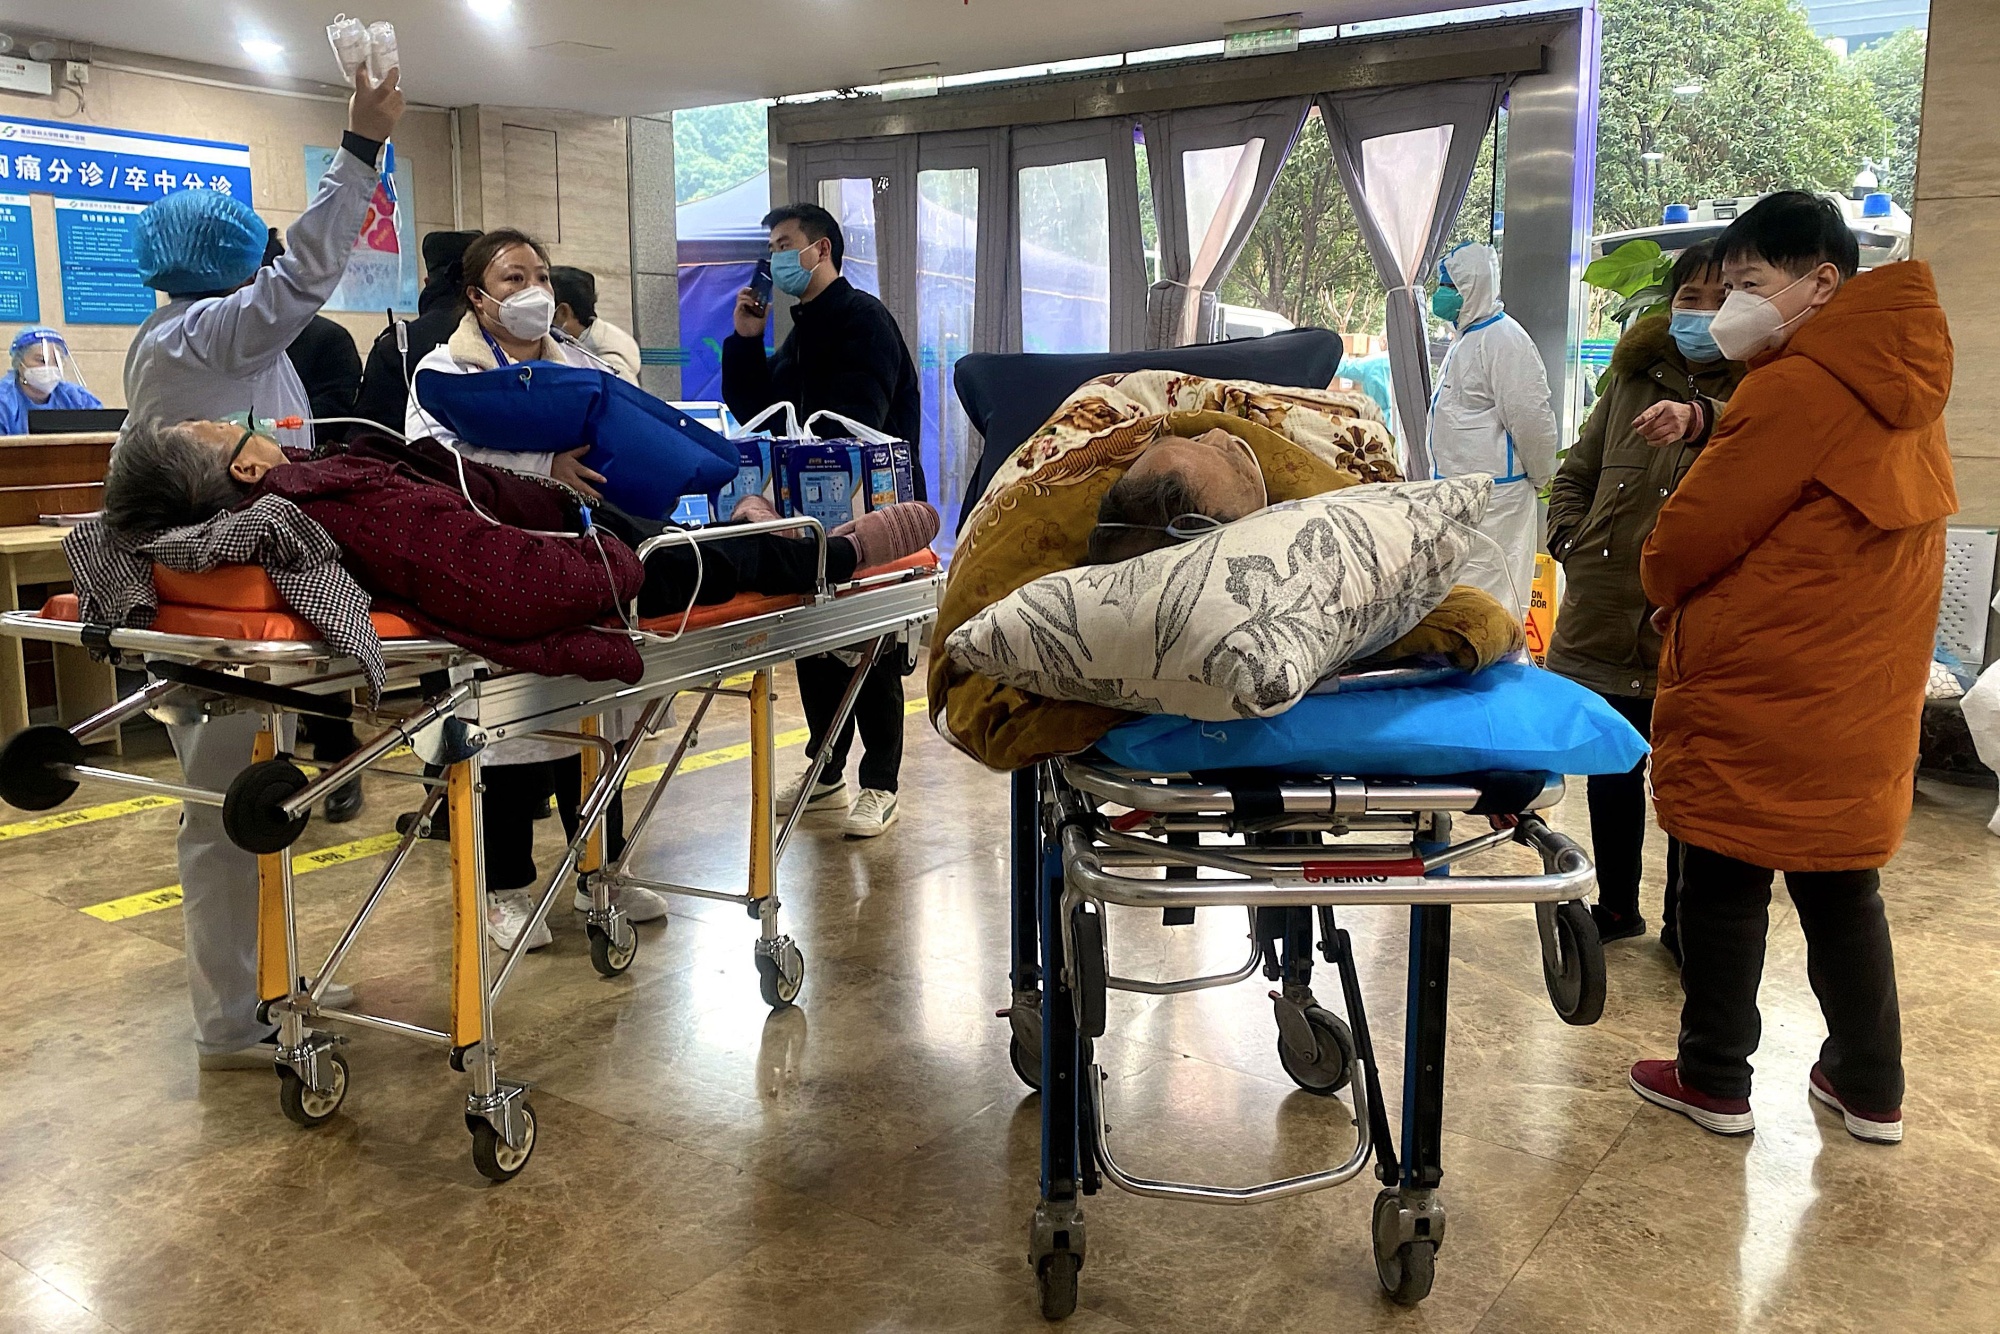 Covid-19 patients on stretchers in the emergency ward of the First Affiliated Hospital of Chongqing Medical University on Dec. 22.